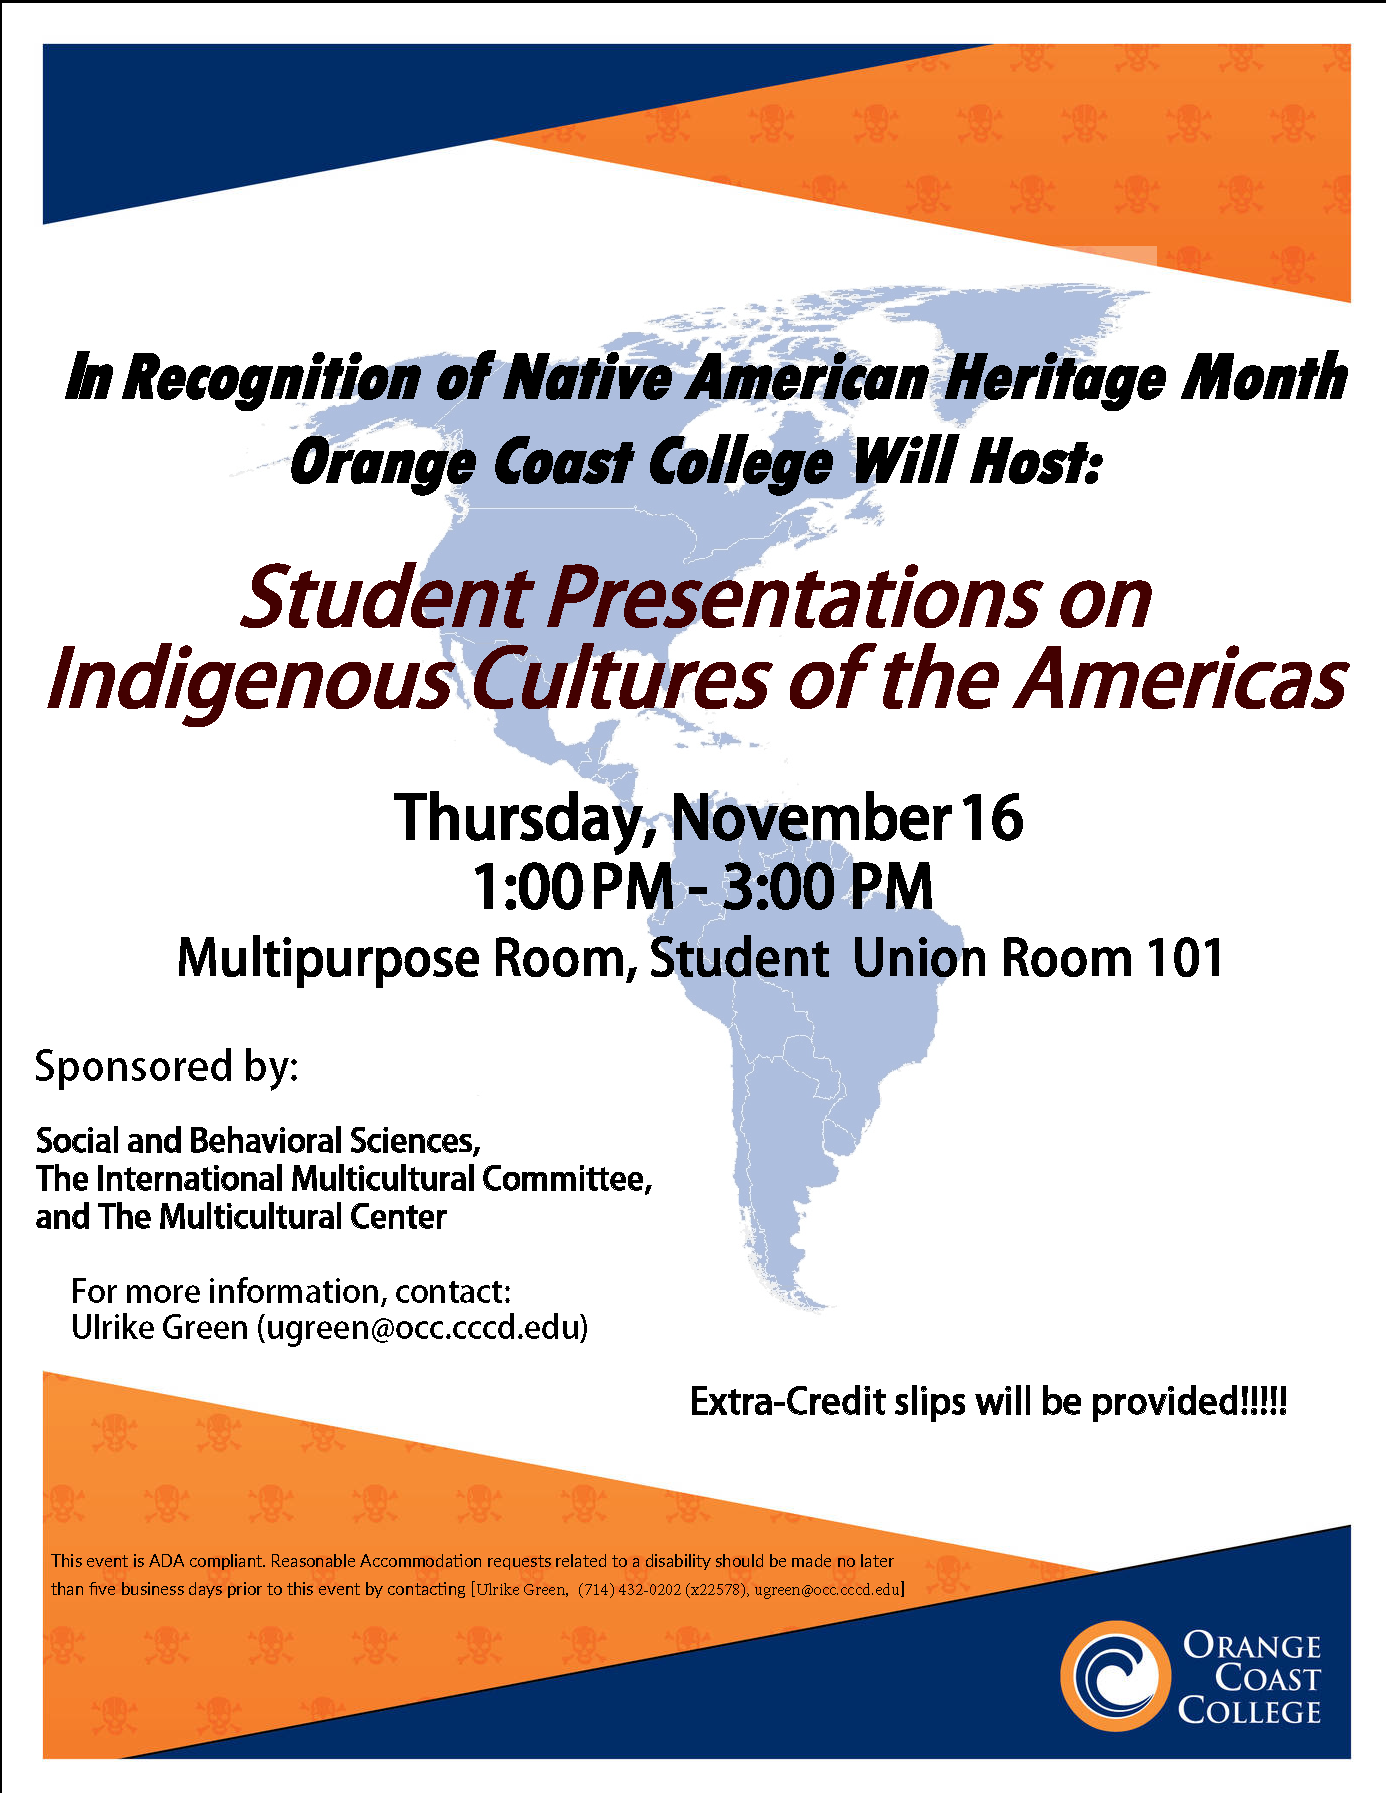 Native American Heritage Month Flyer